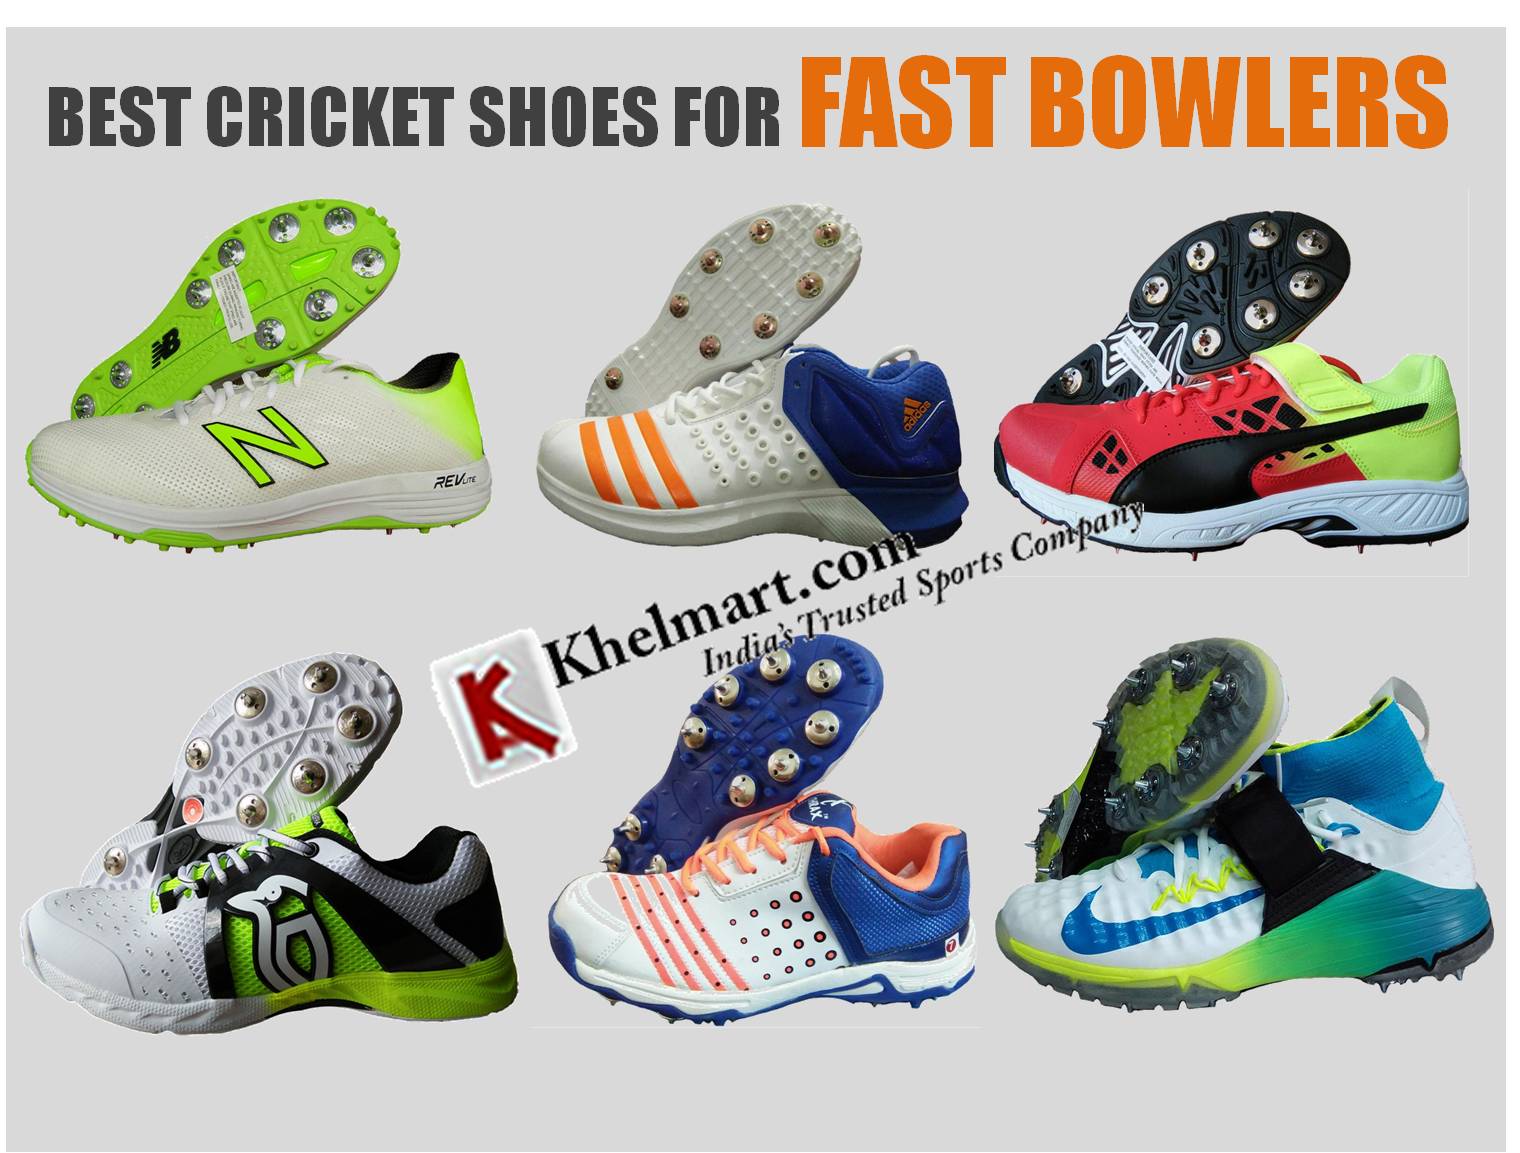 BEST_CRICKET_SHOES_FOR_FAST_BOWLER.jpg 